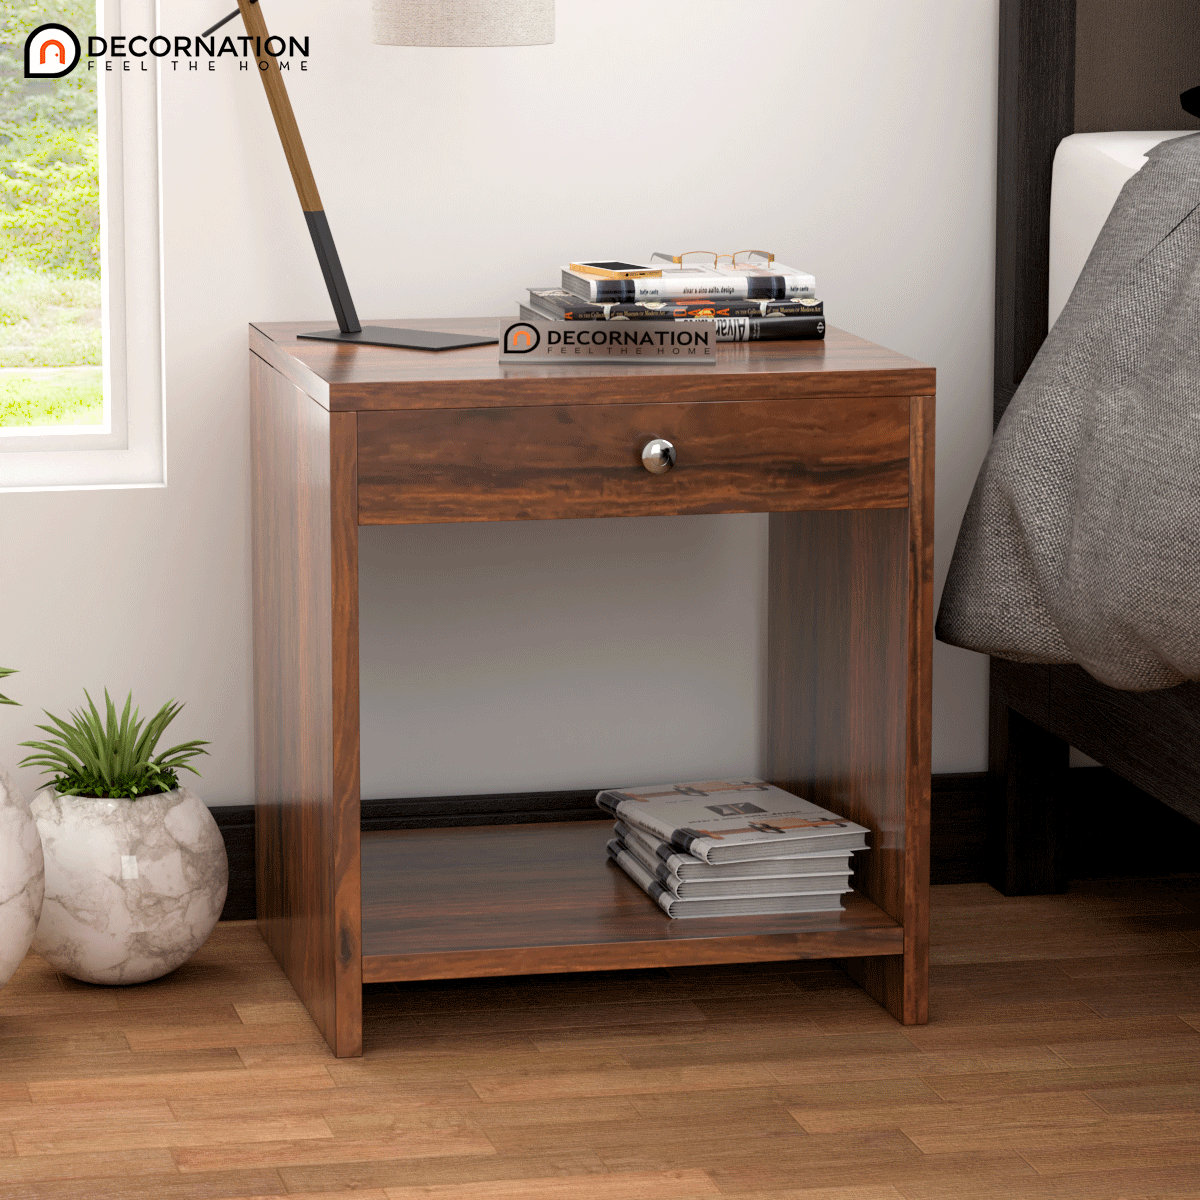 Xeno Wooden Storage Bedside Table – Brown